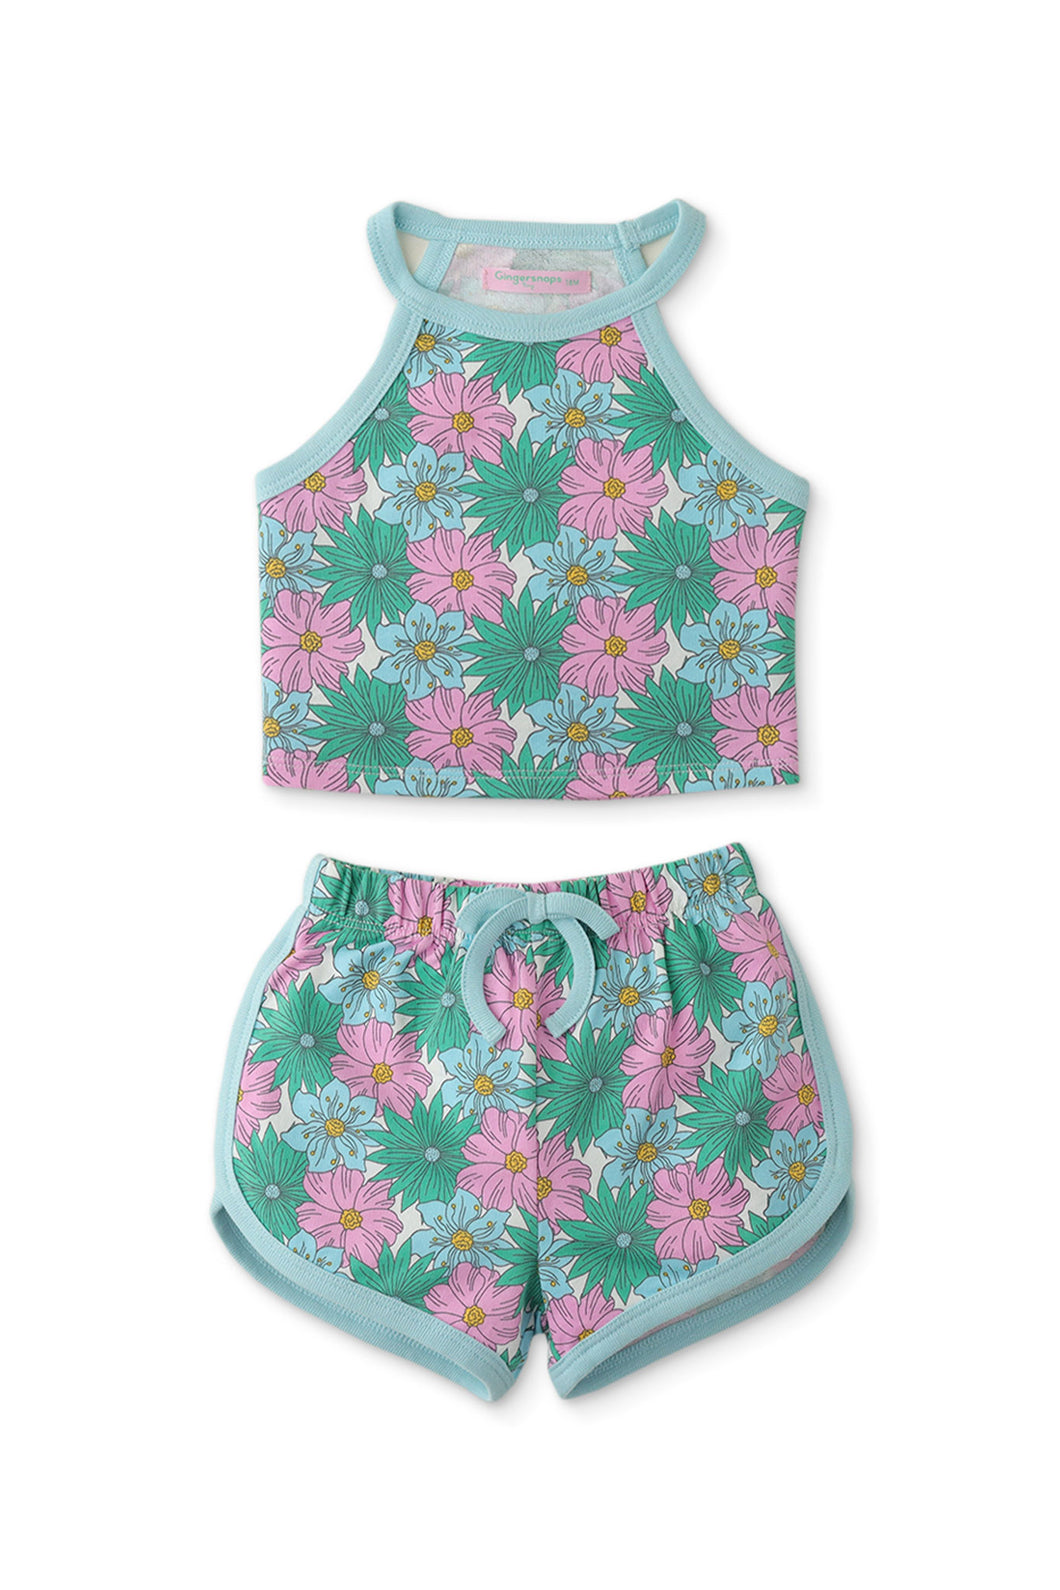 Gingersnaps Flower Print Halter Top and Shorts Set